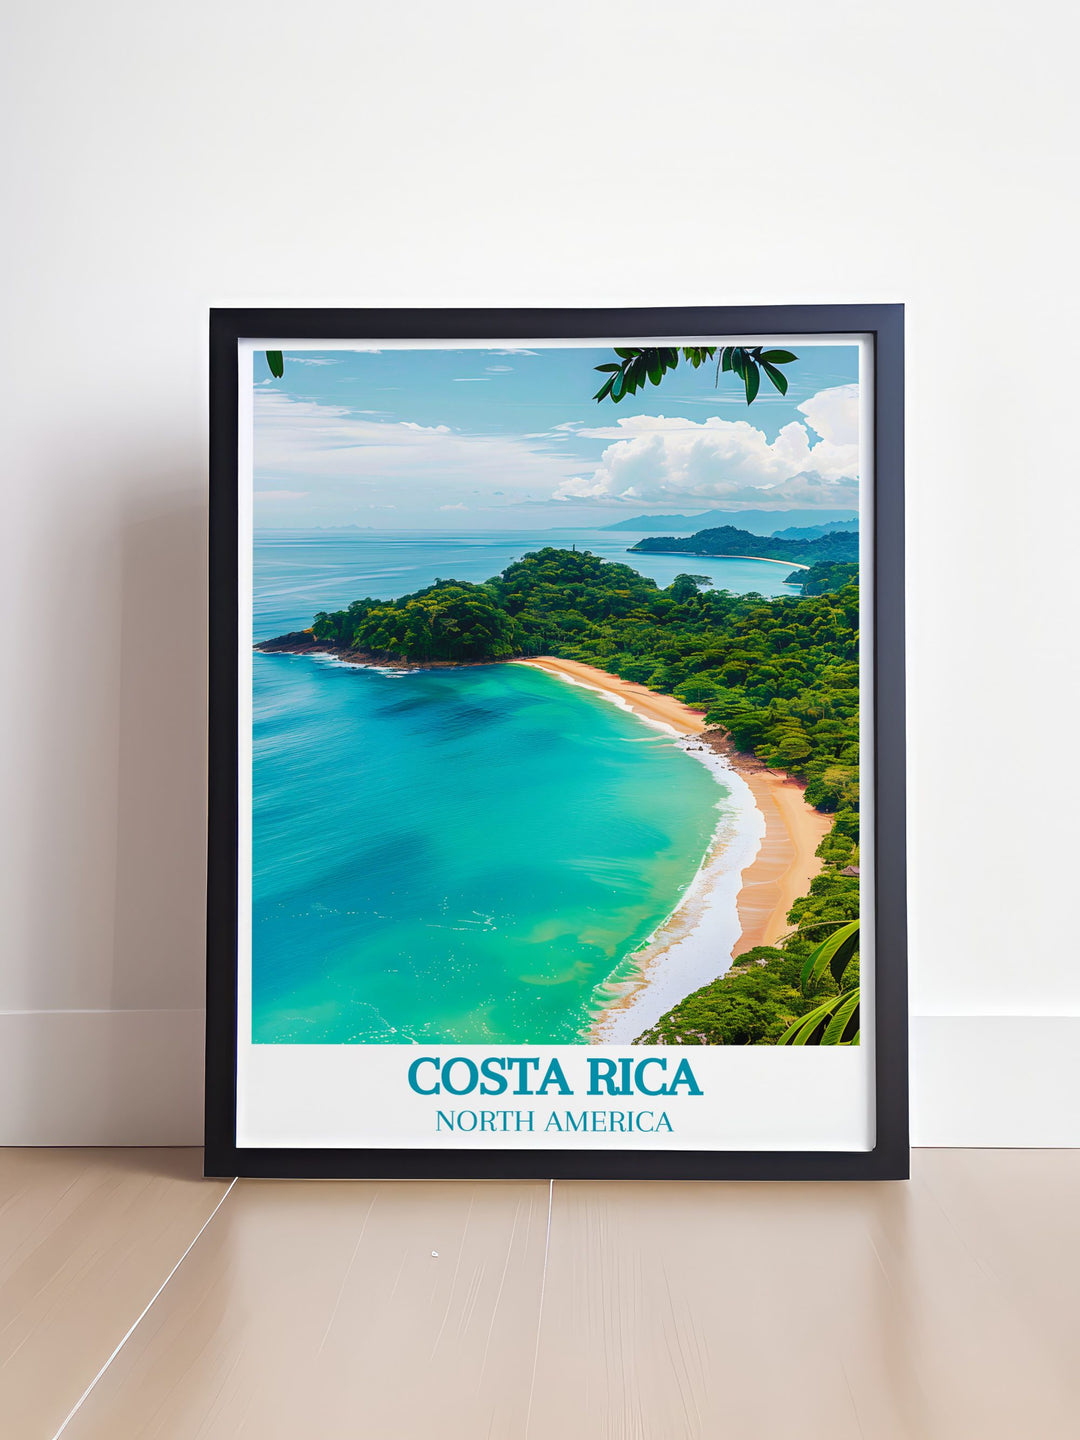 Bring the essence of Costa Rica into your home with this beautiful travel poster of Manuel Antonio National Park, showcasing its lush rainforests and clear waters, perfect for adding a touch of tropical beauty to your space.